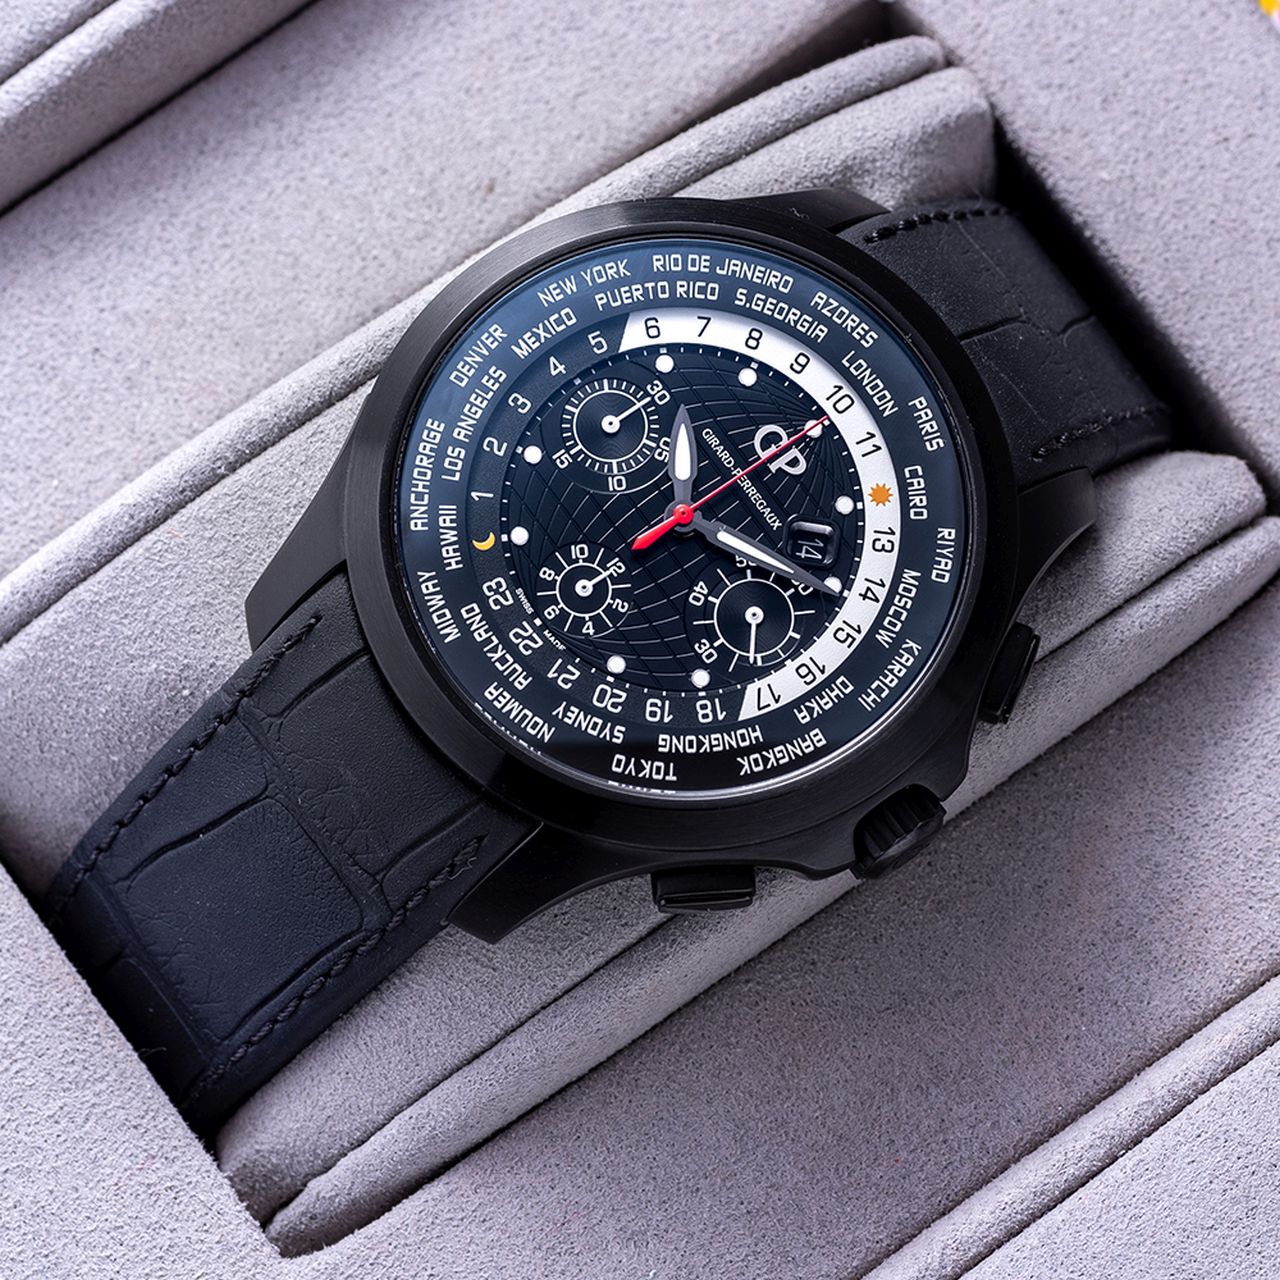 GENTLEMAN'S GIRARD PERREGAUX TRAVELLER WW.TC CHRONOGRAPH BLACK, NOVEMBER 2016 BOX AND PAPERS, 44MM - Image 2 of 11